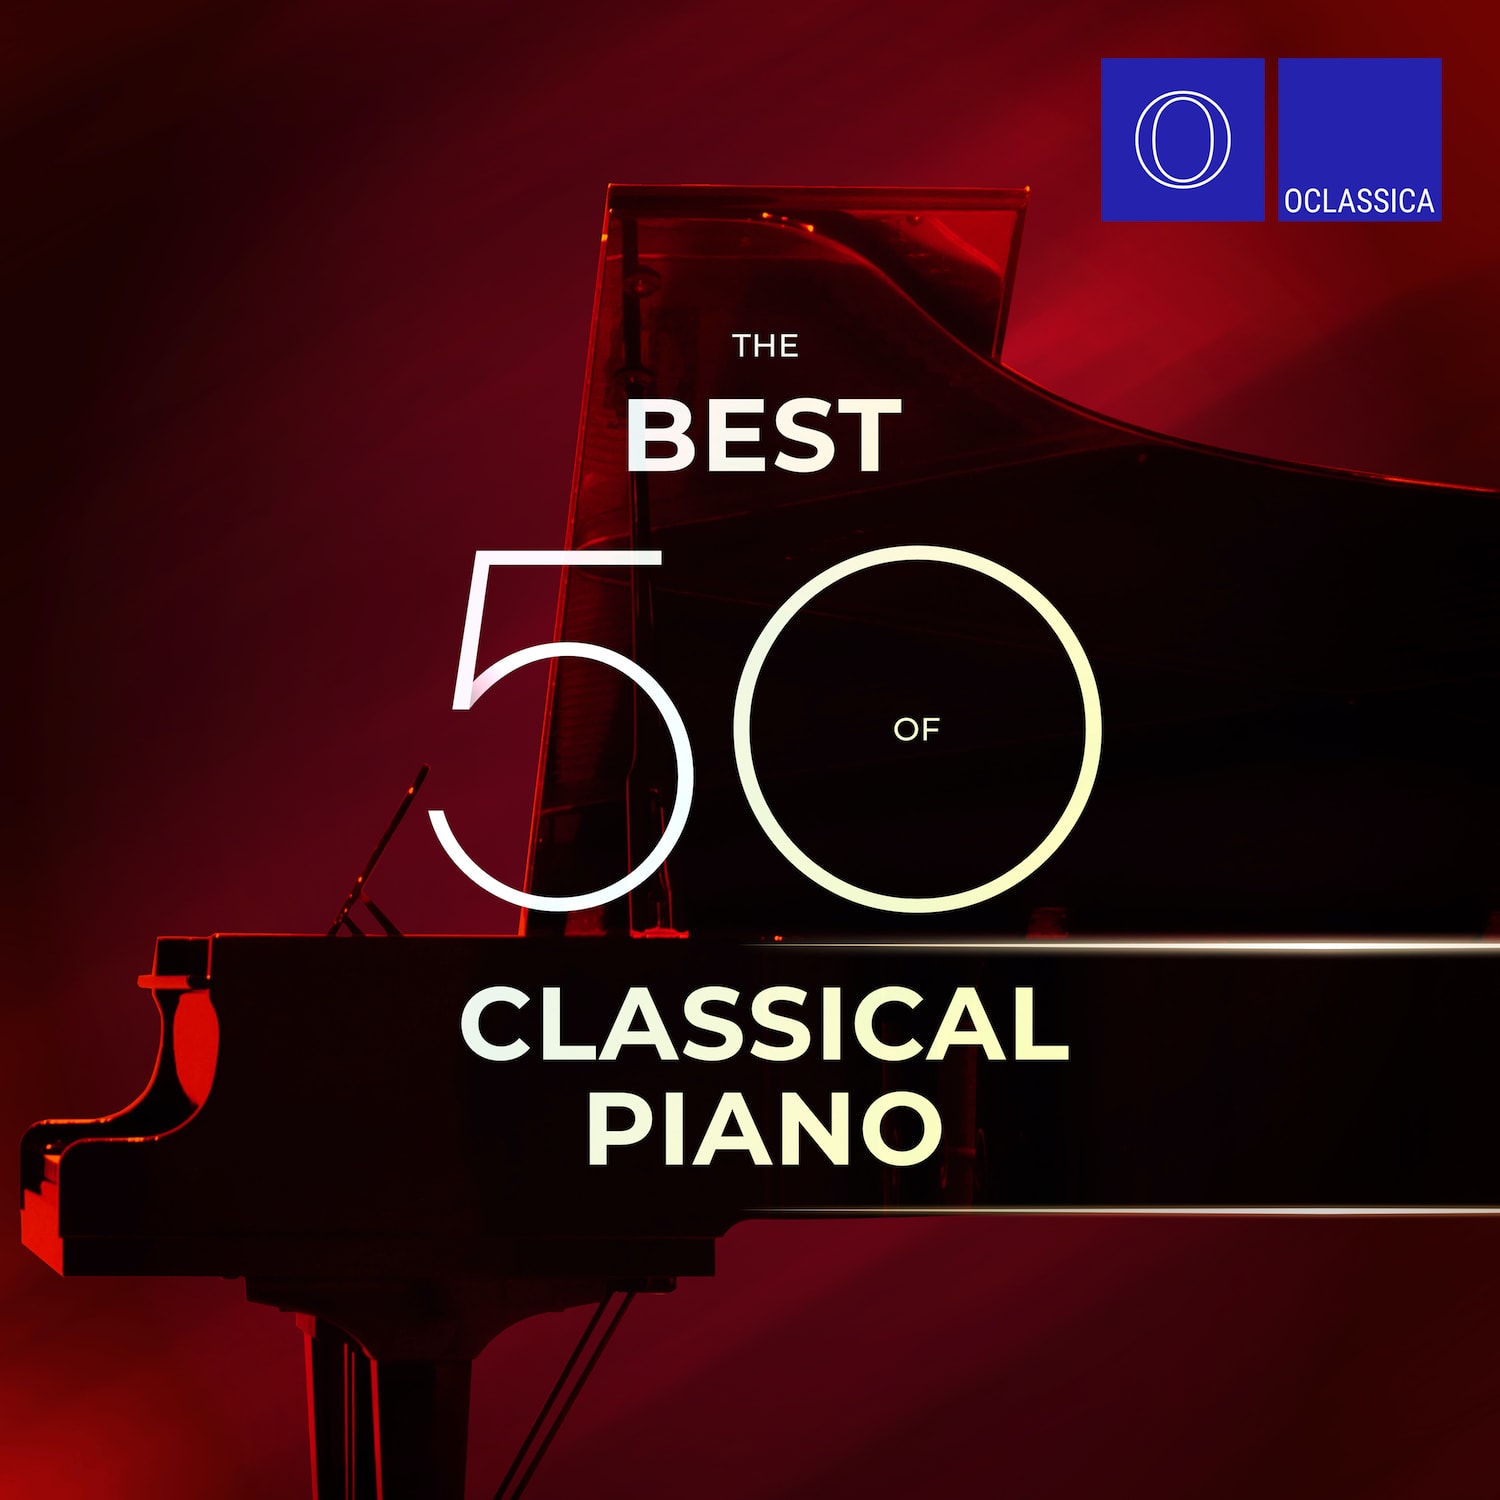 The Best 50 of Classical Piano